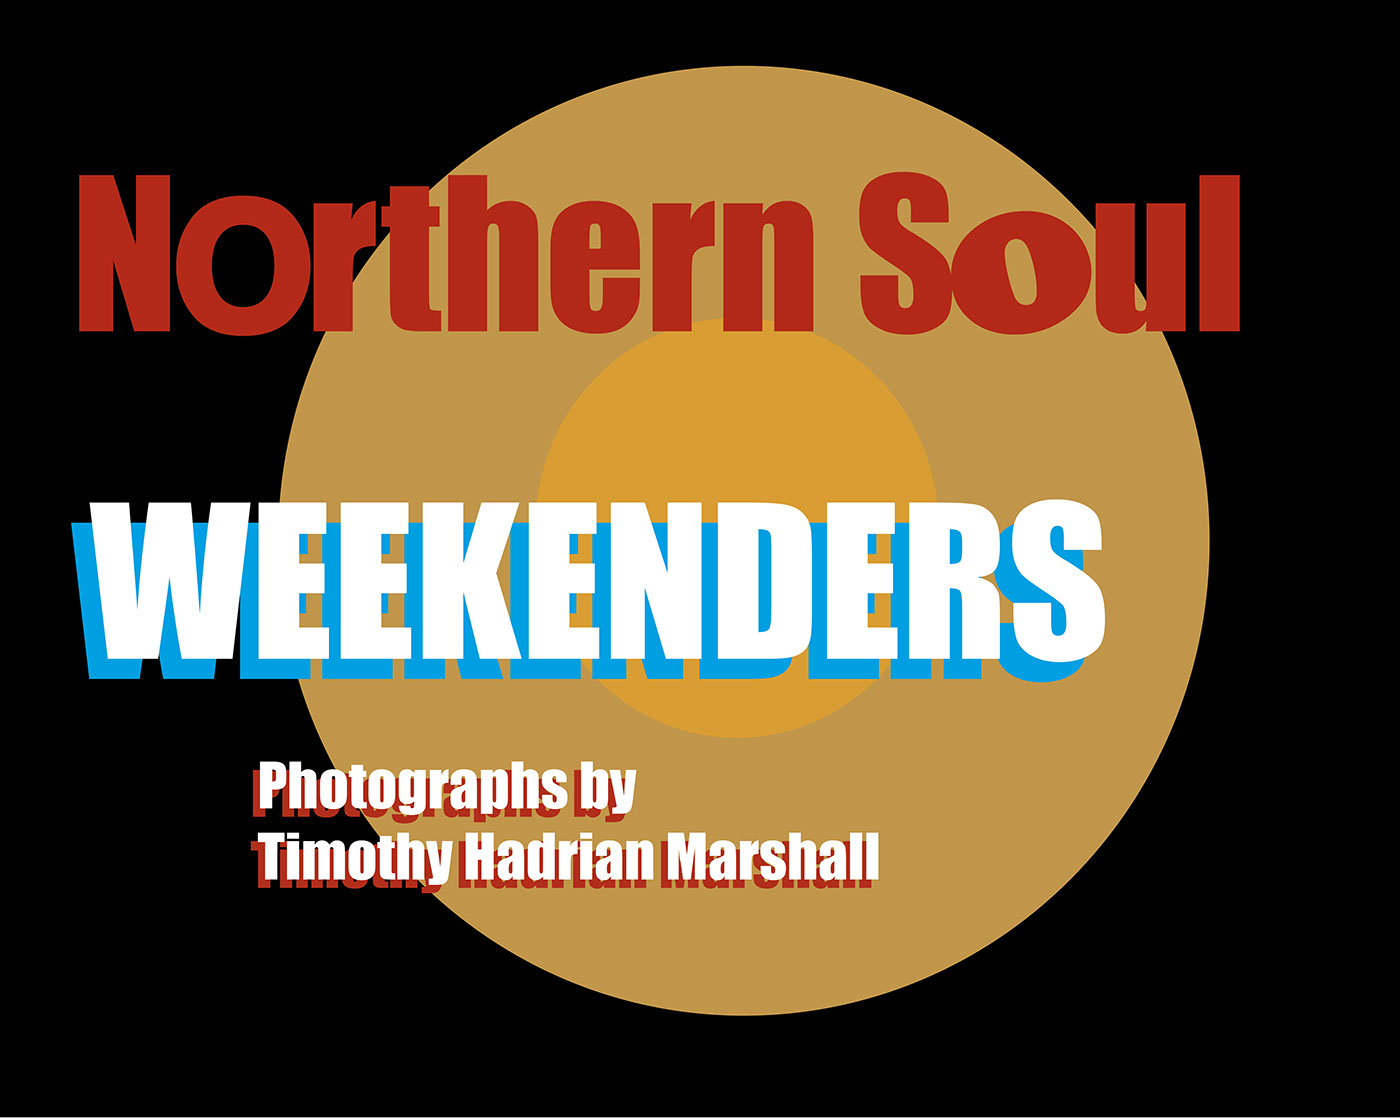 Northern Soul Detroit Motown weekenders Alnighter Central Soul Club Vinyl only Talc free area Out on the 45rpm 100 club